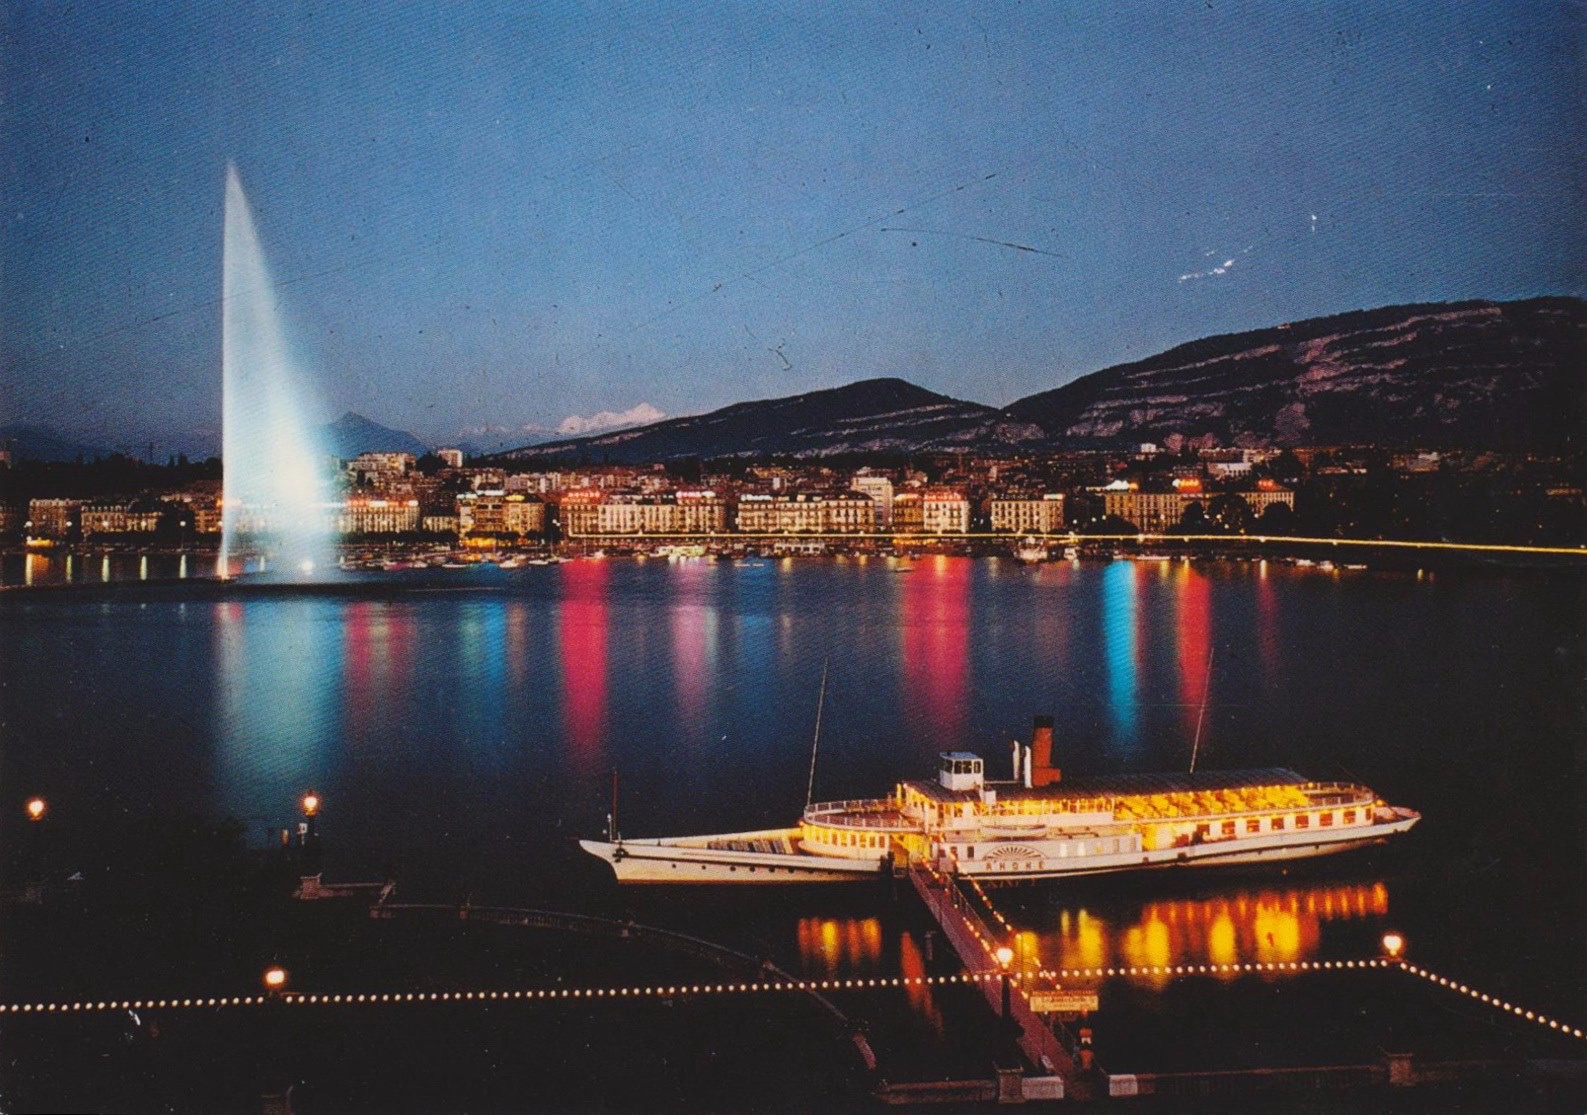 Vintage postcard of Geneva with a view of Lac Léman and a paddle boat, the Jet d’Eau, la Rade with colourful lights and the Salève.